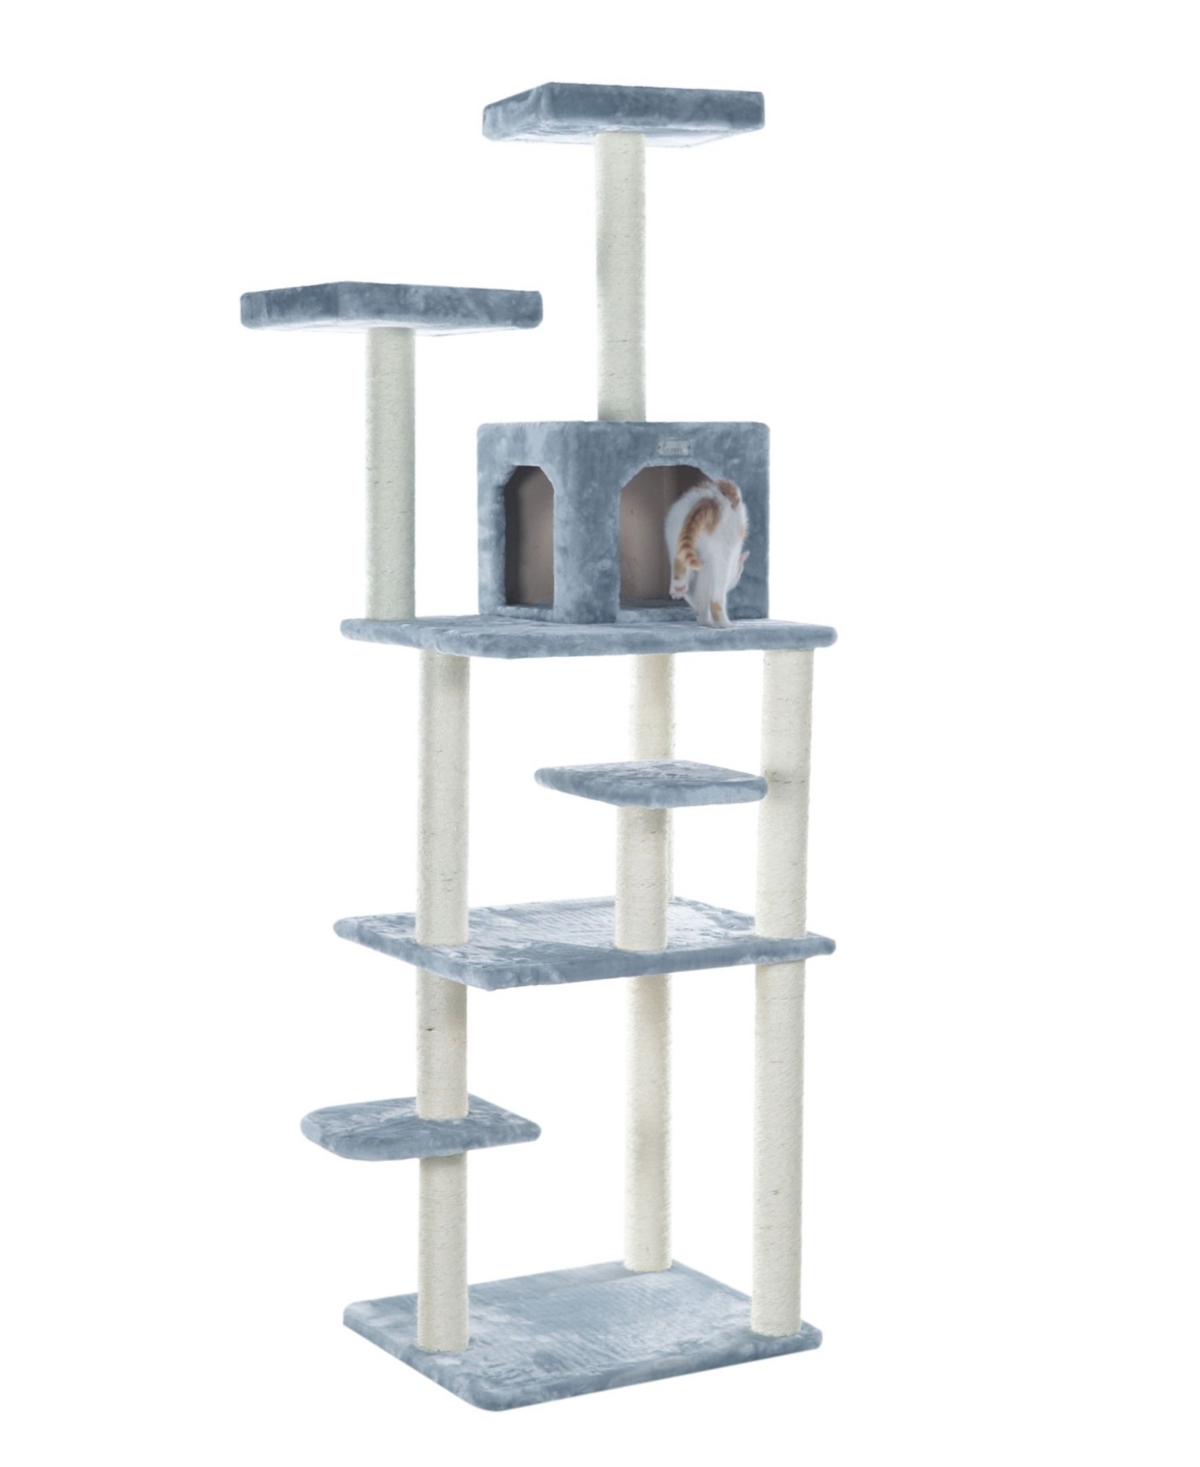 GleePet 74-Inch Real Wood Cat Tree With Seven Levels - Silver-Tone and Gray